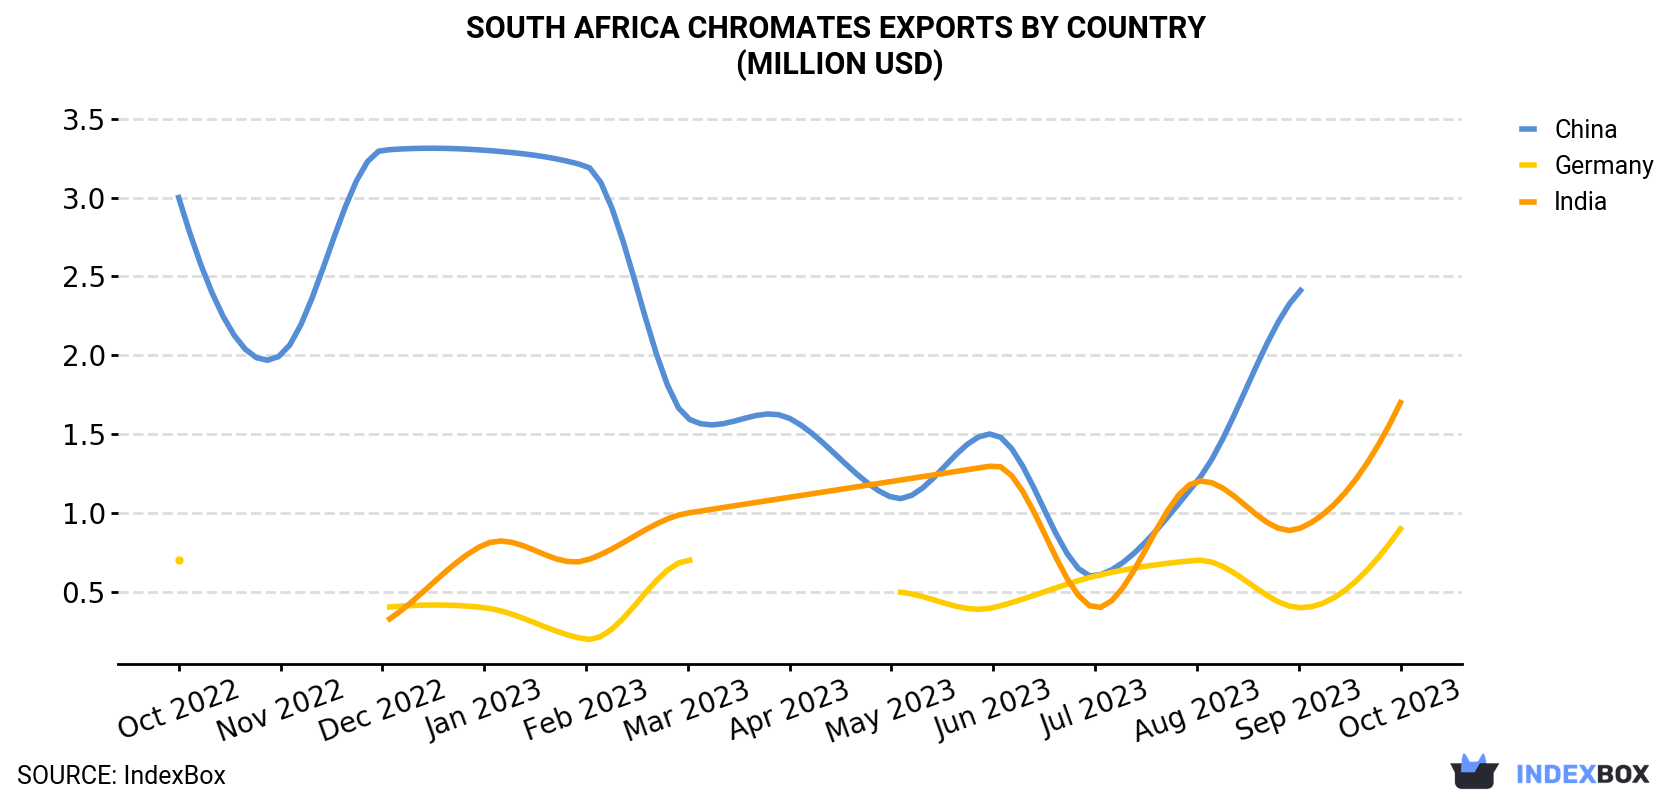 South Africa Chromates Exports By Country (Million USD)